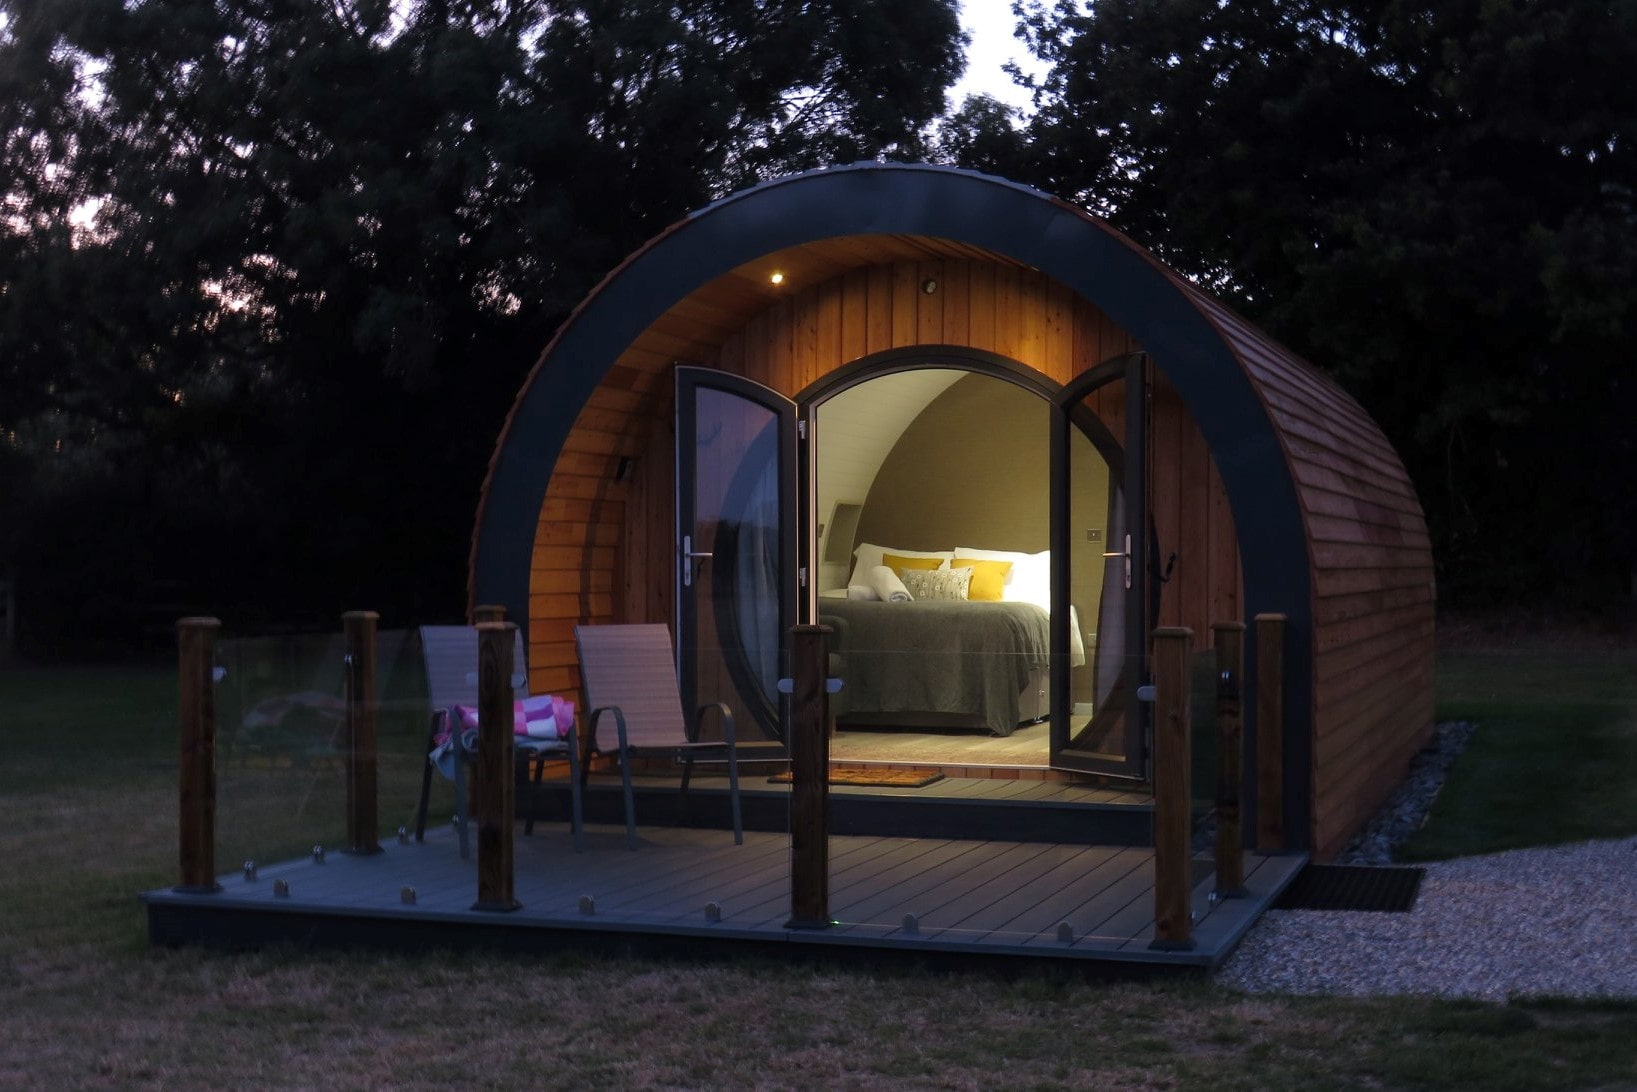 millview-meadow-glamping-pod-lit-up-at-night-in-field